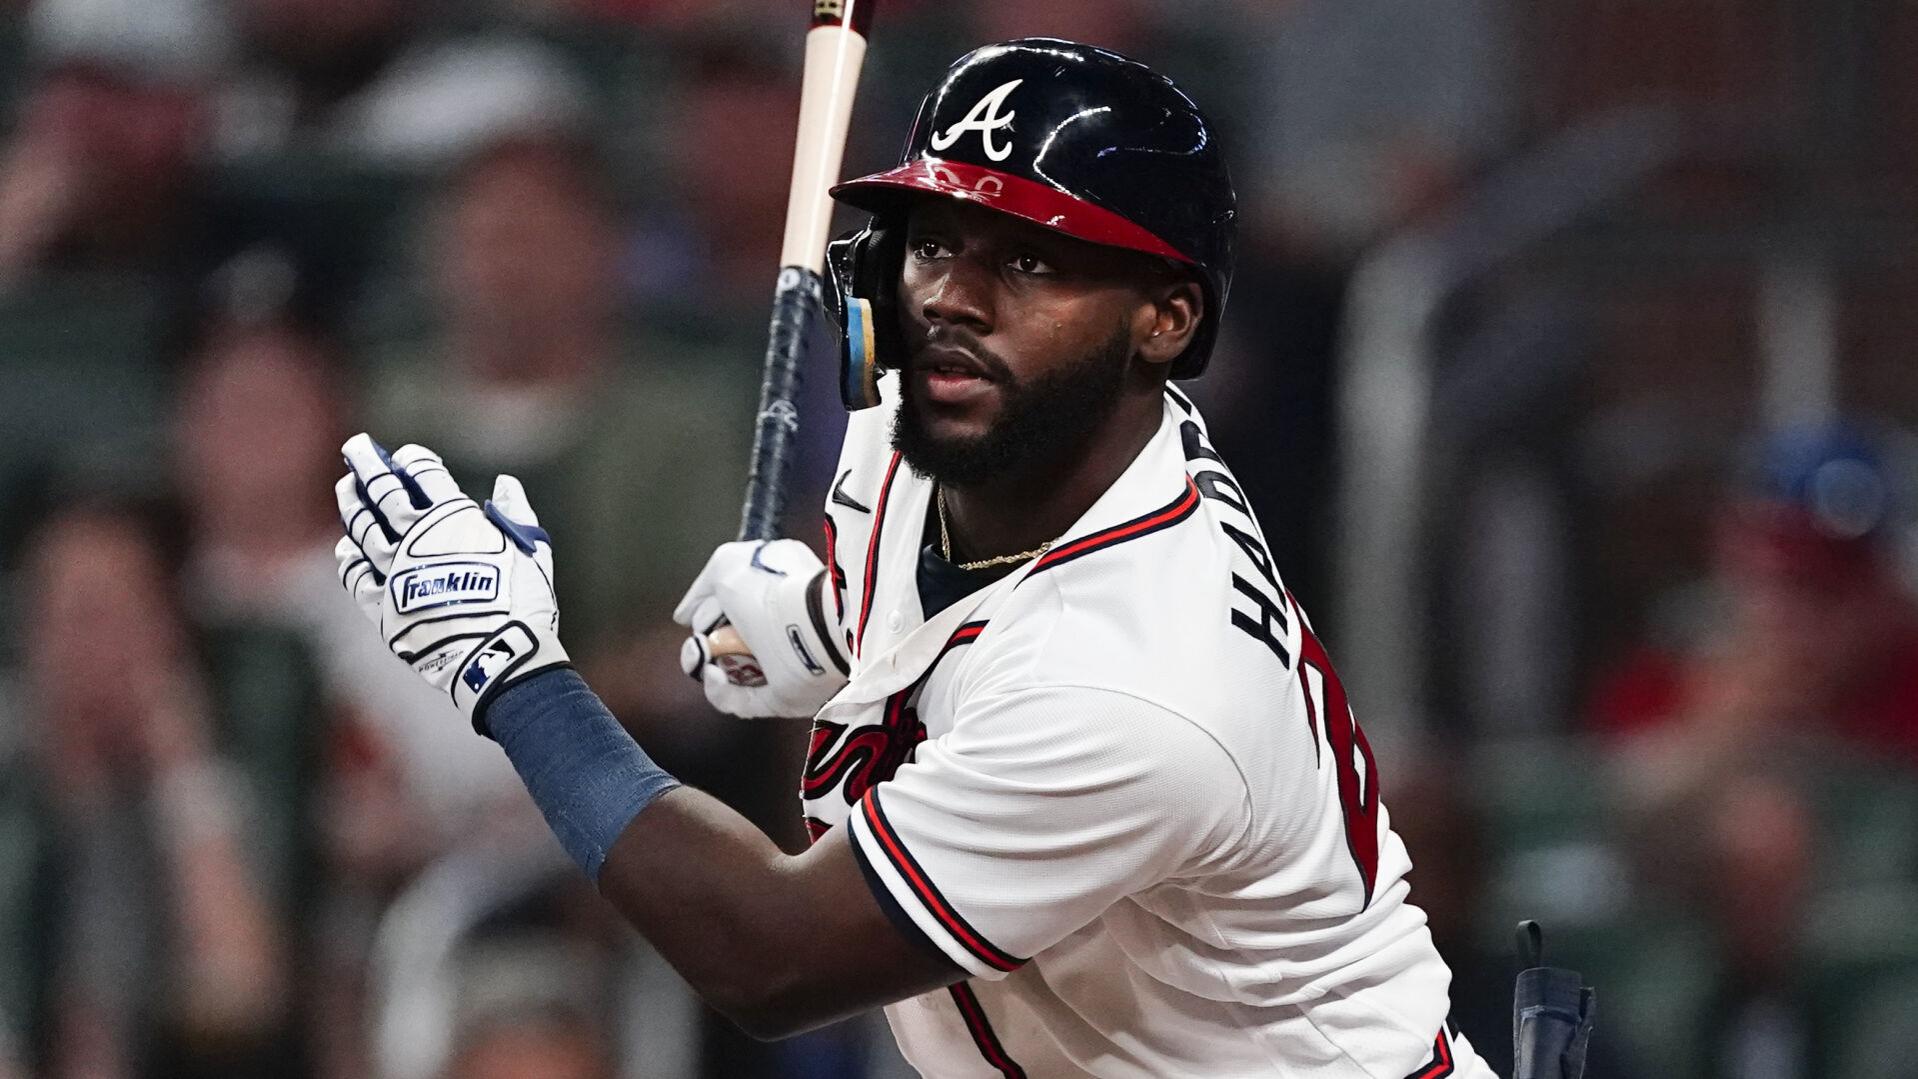 Braves rookie Michael Harris II went from an to NL East fixture